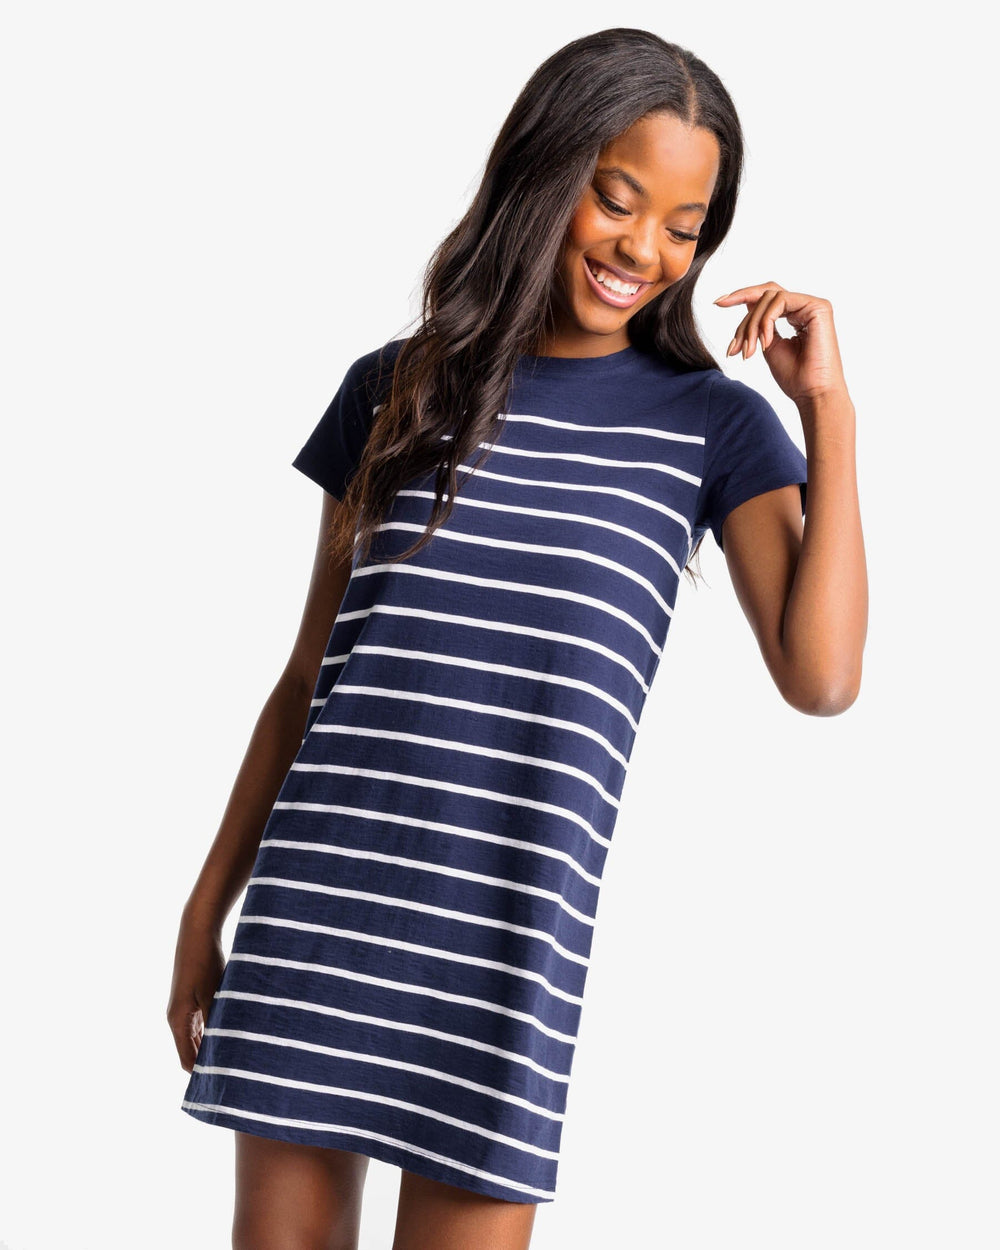 The front view of the Southern Tide Delilah Sun Farer T-shirt Shirt Dress by Southern Tide - Nautical Navy